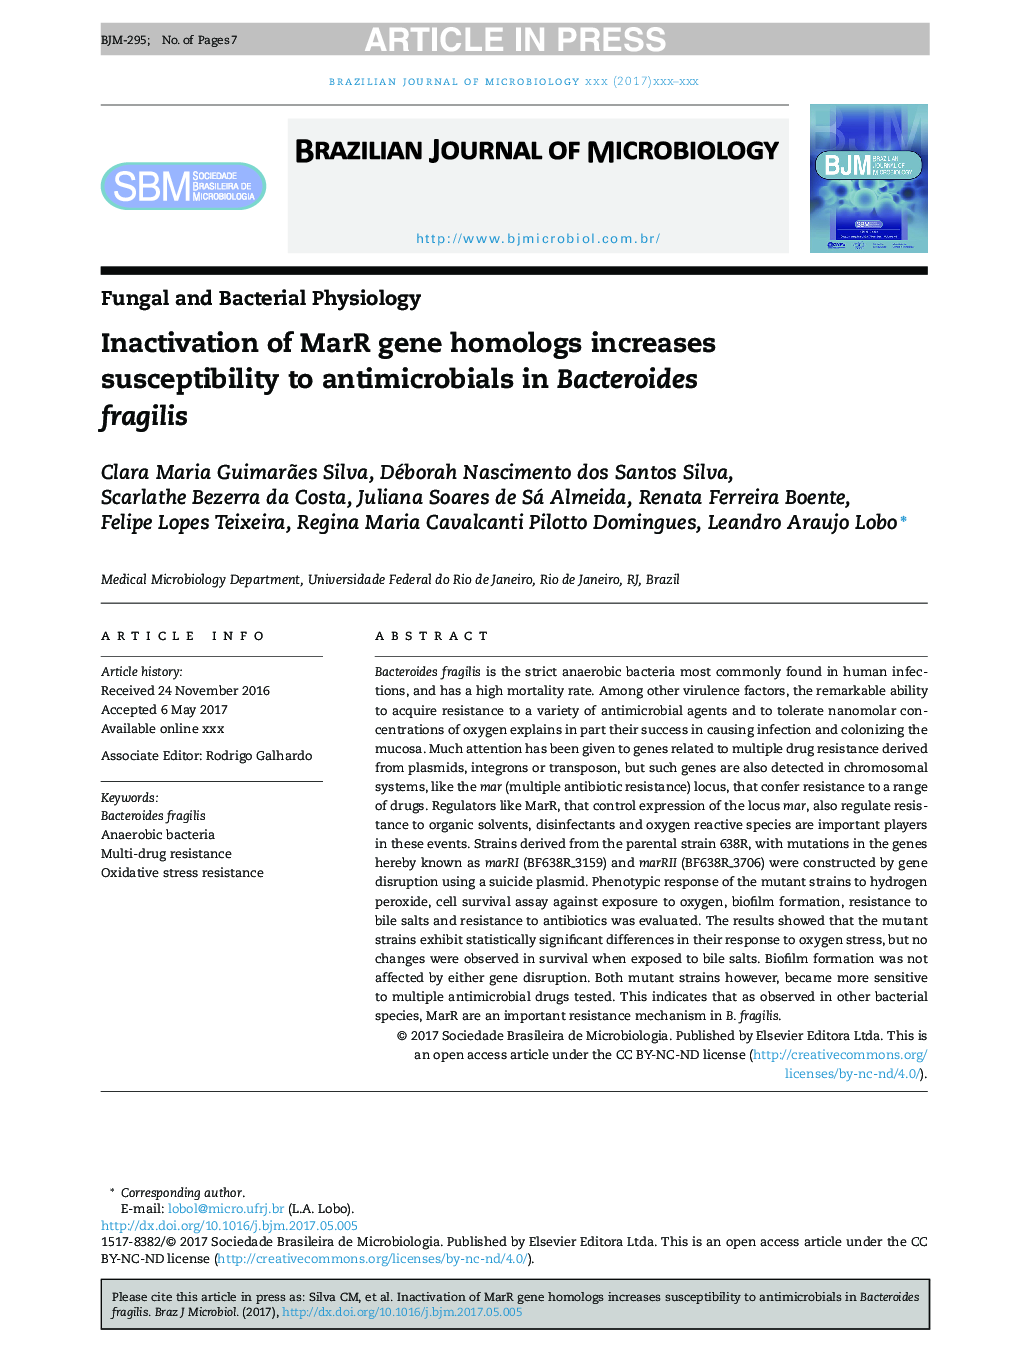 Inactivation of MarR gene homologs increases susceptibility to antimicrobials in Bacteroides fragilis